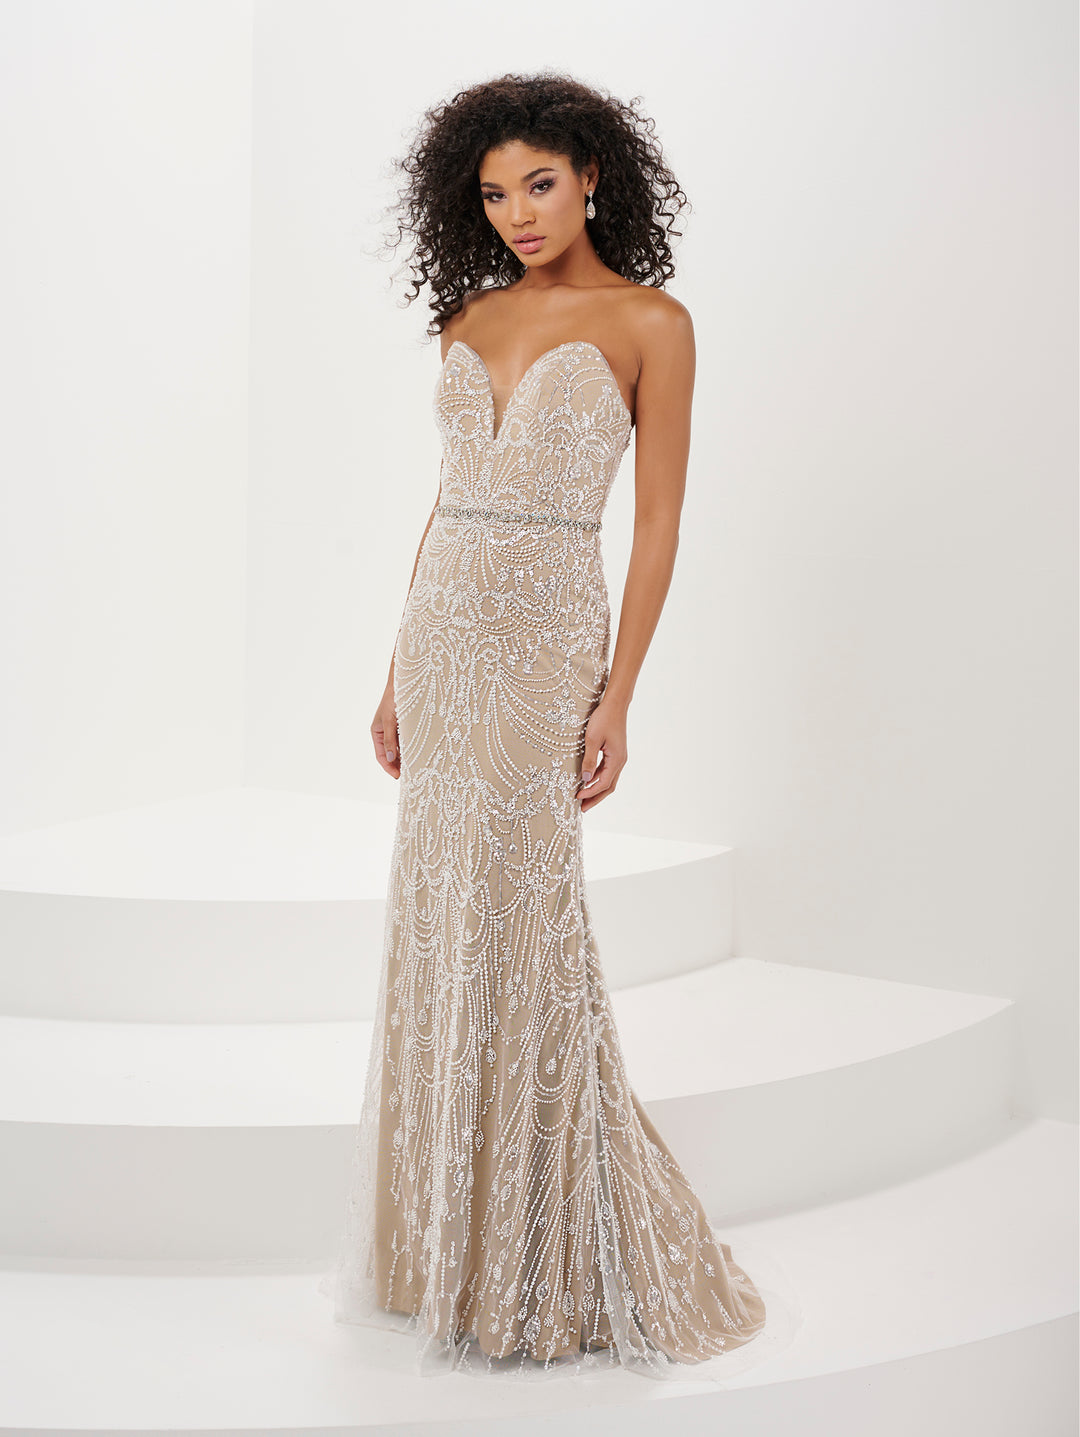 Fitted Beaded Tulle Strapless Cape Gown by Panoply 14189